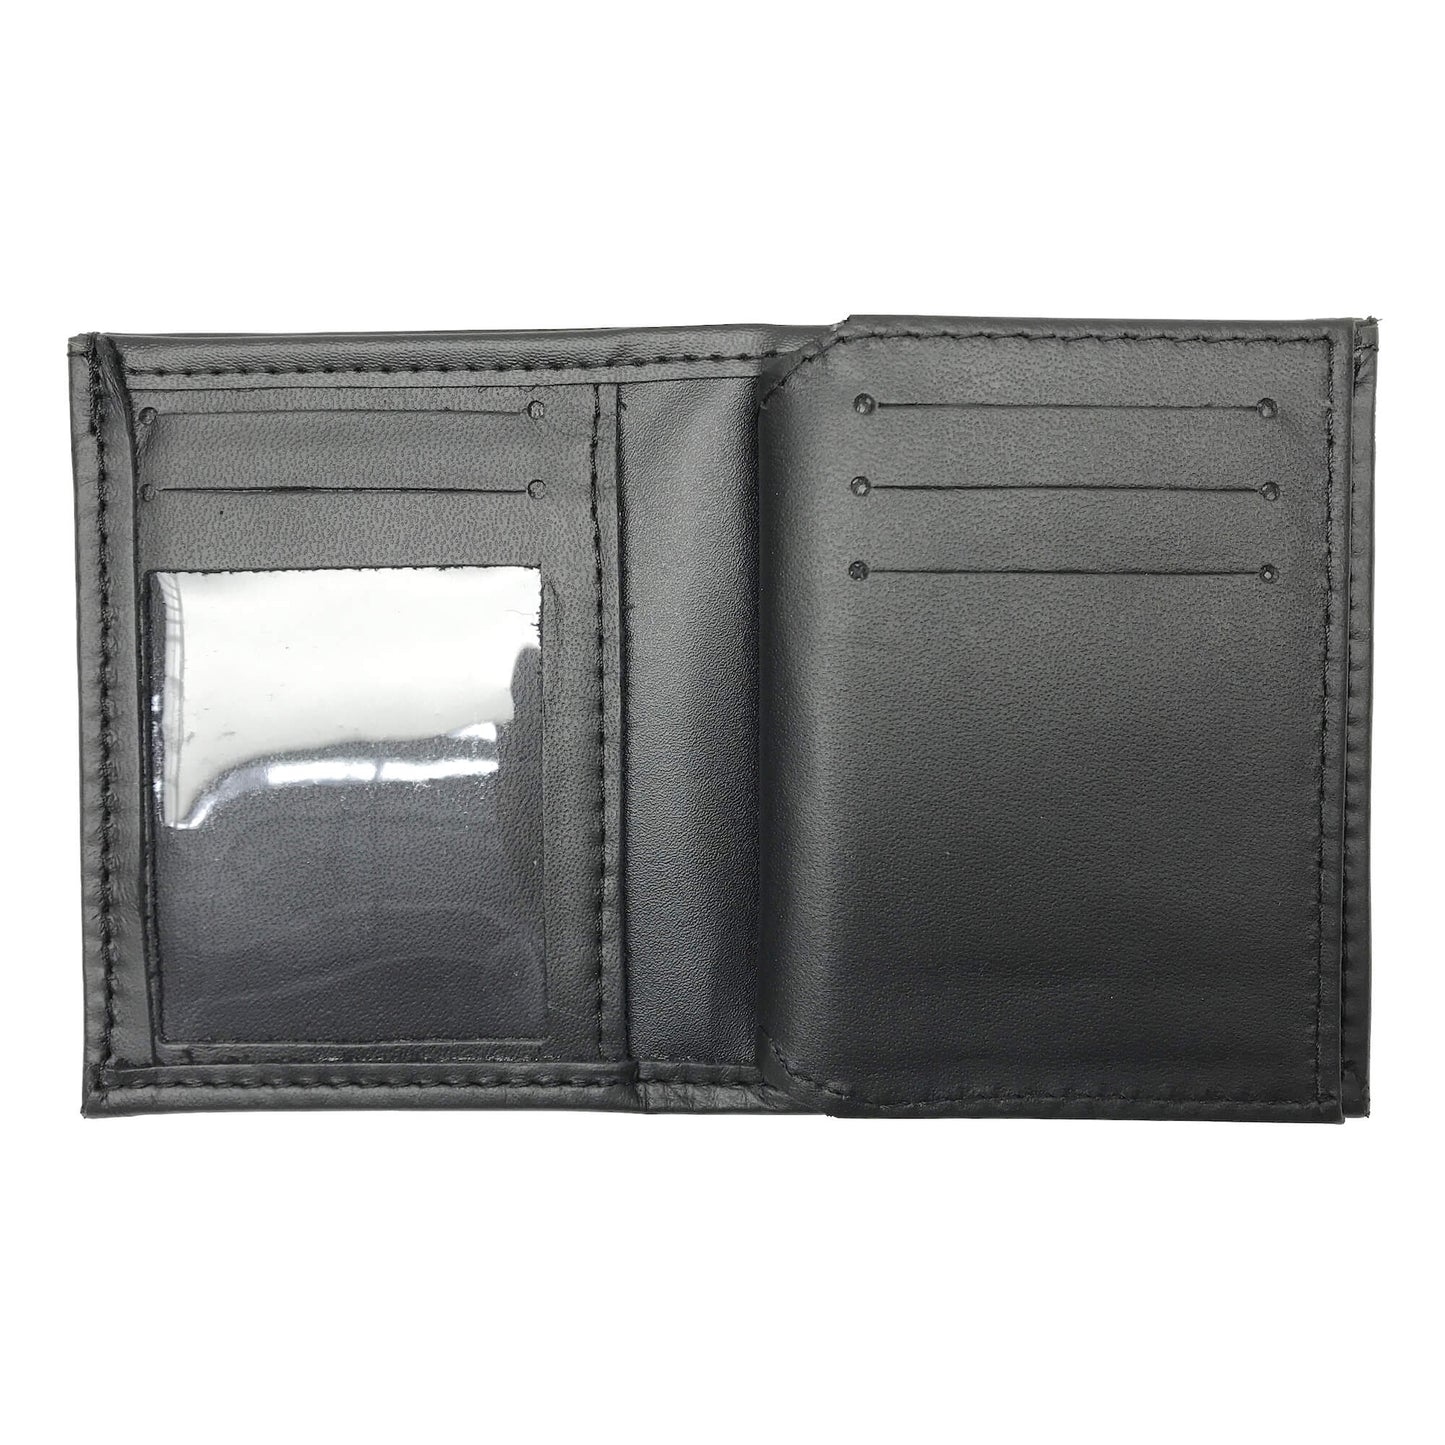 U.S. Federal Air Marshal (3in) Bifold Hidden Badge Wallet-Perfect Fit-911 Duty Gear USA